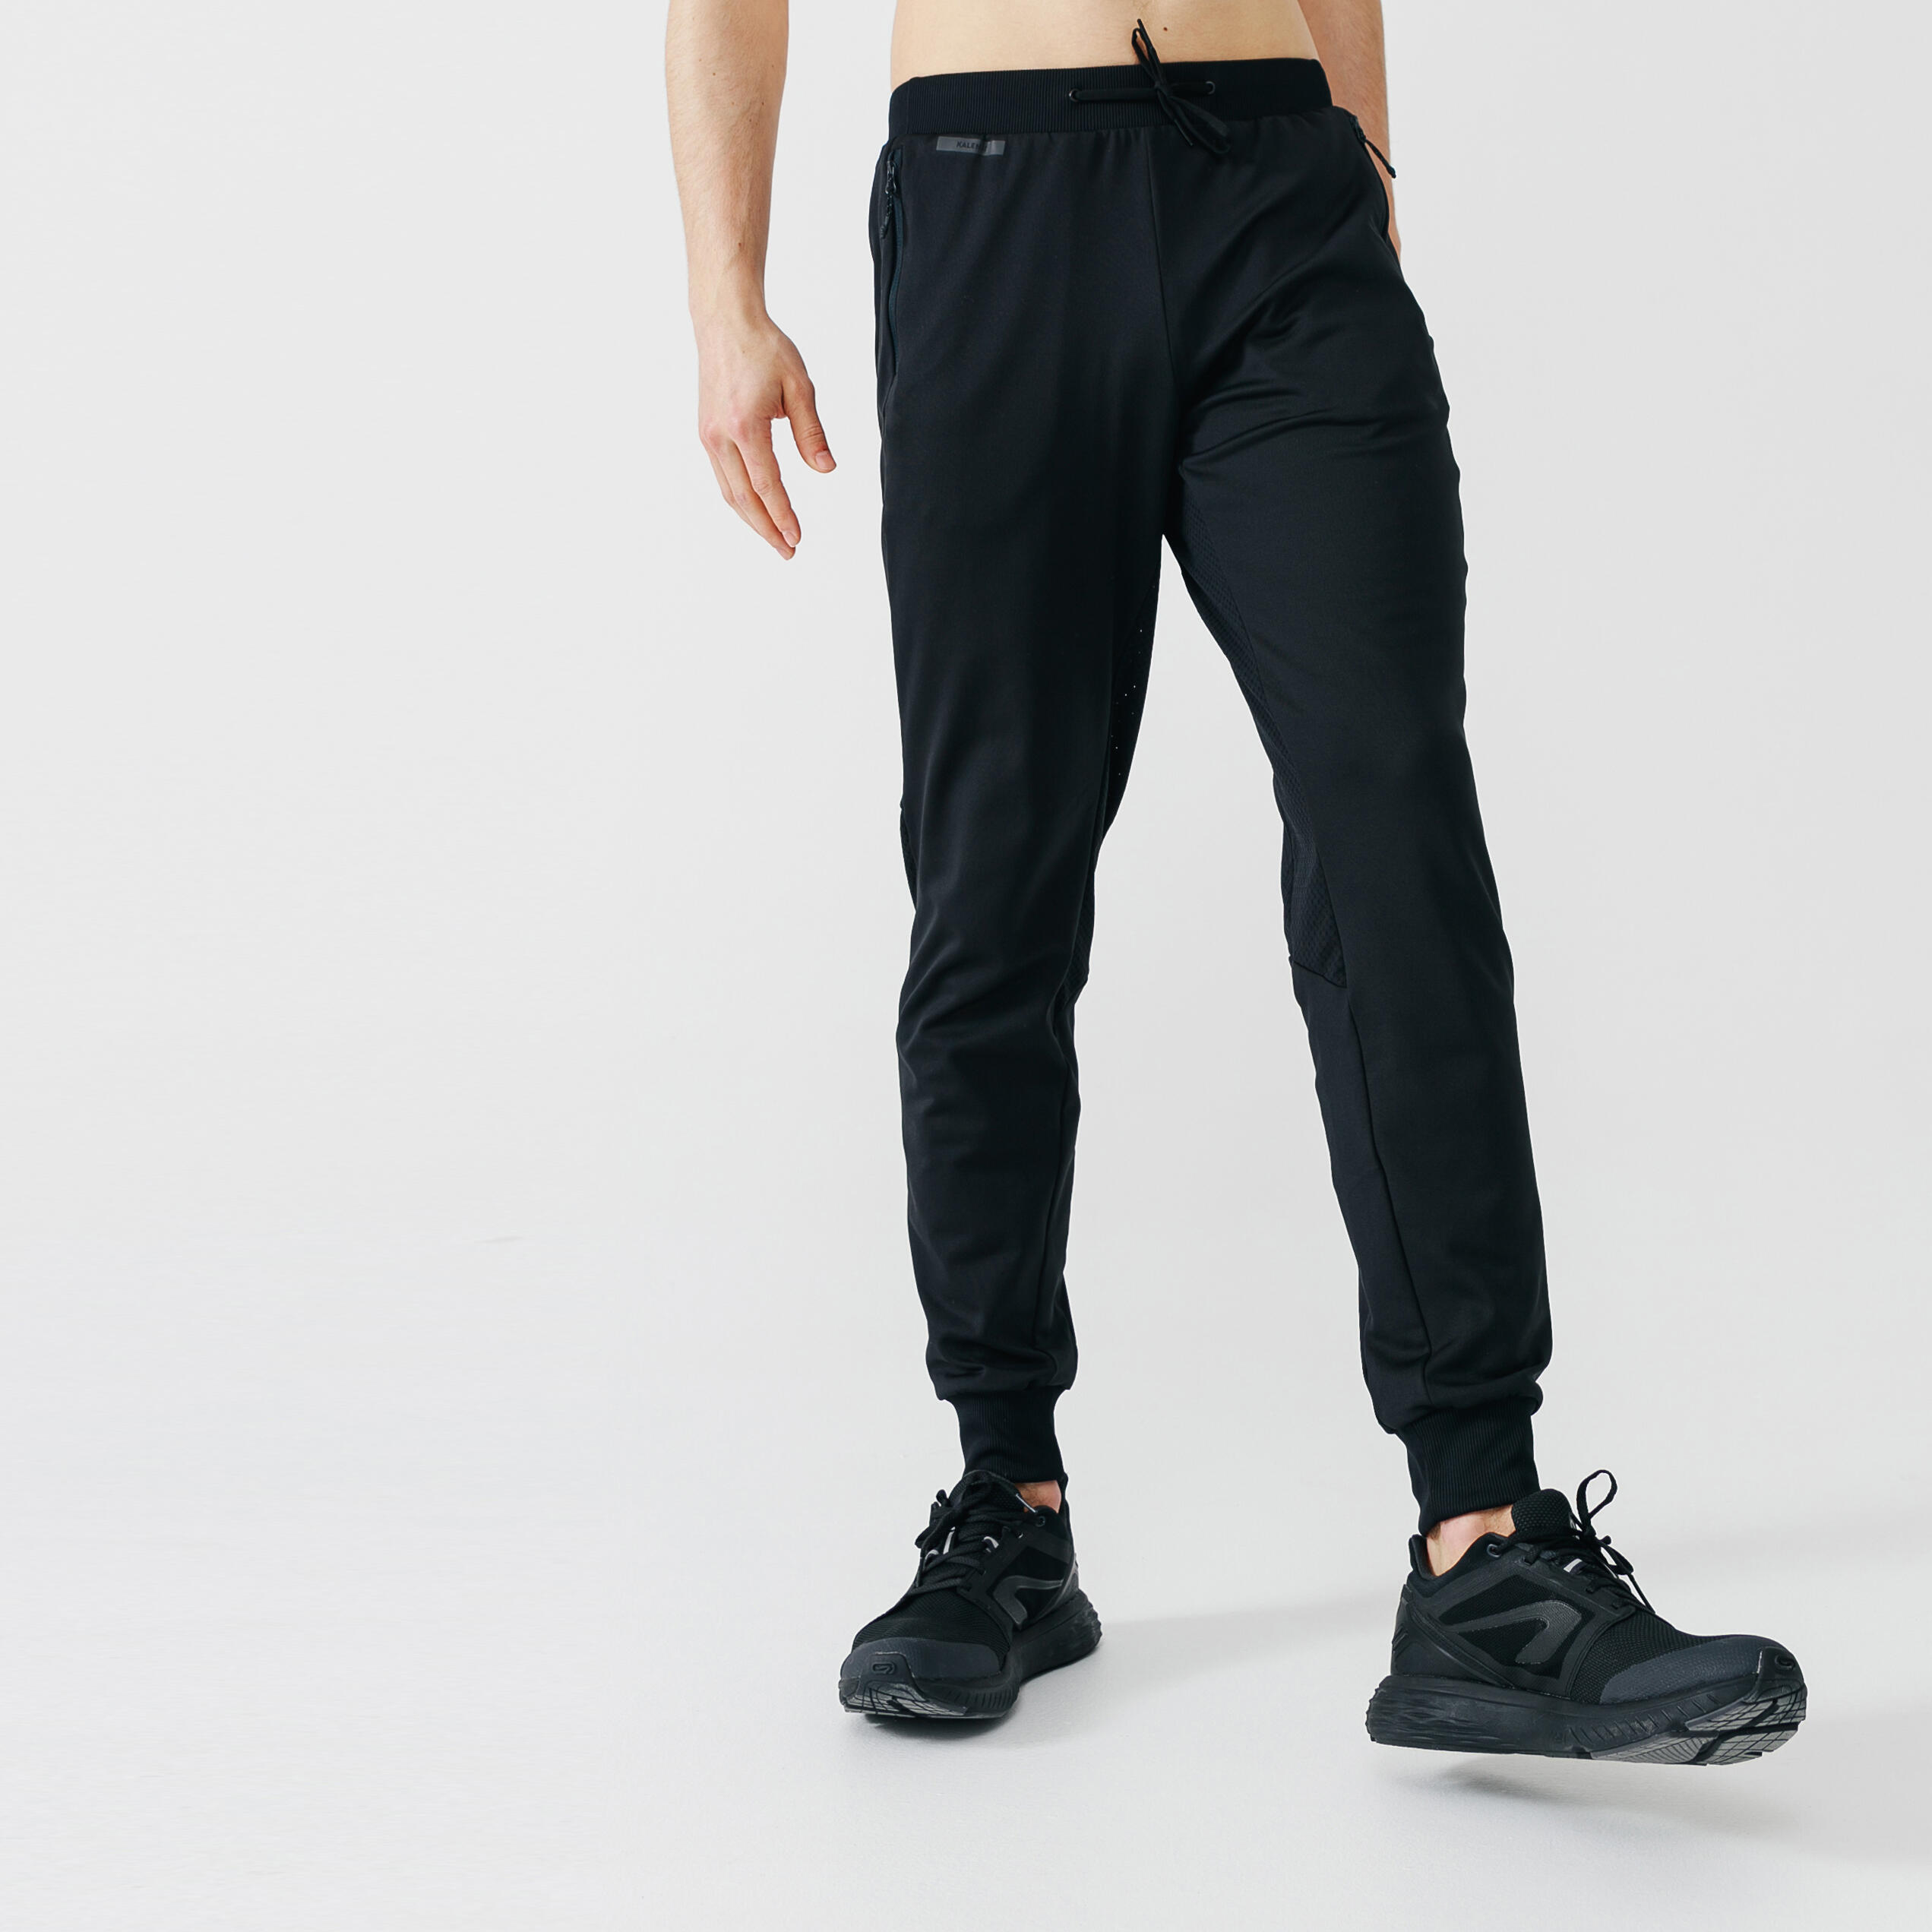 Decathlon Domyos Black Track Pants Camp, Women's Fashion, Bottoms, Other  Bottoms on Carousell